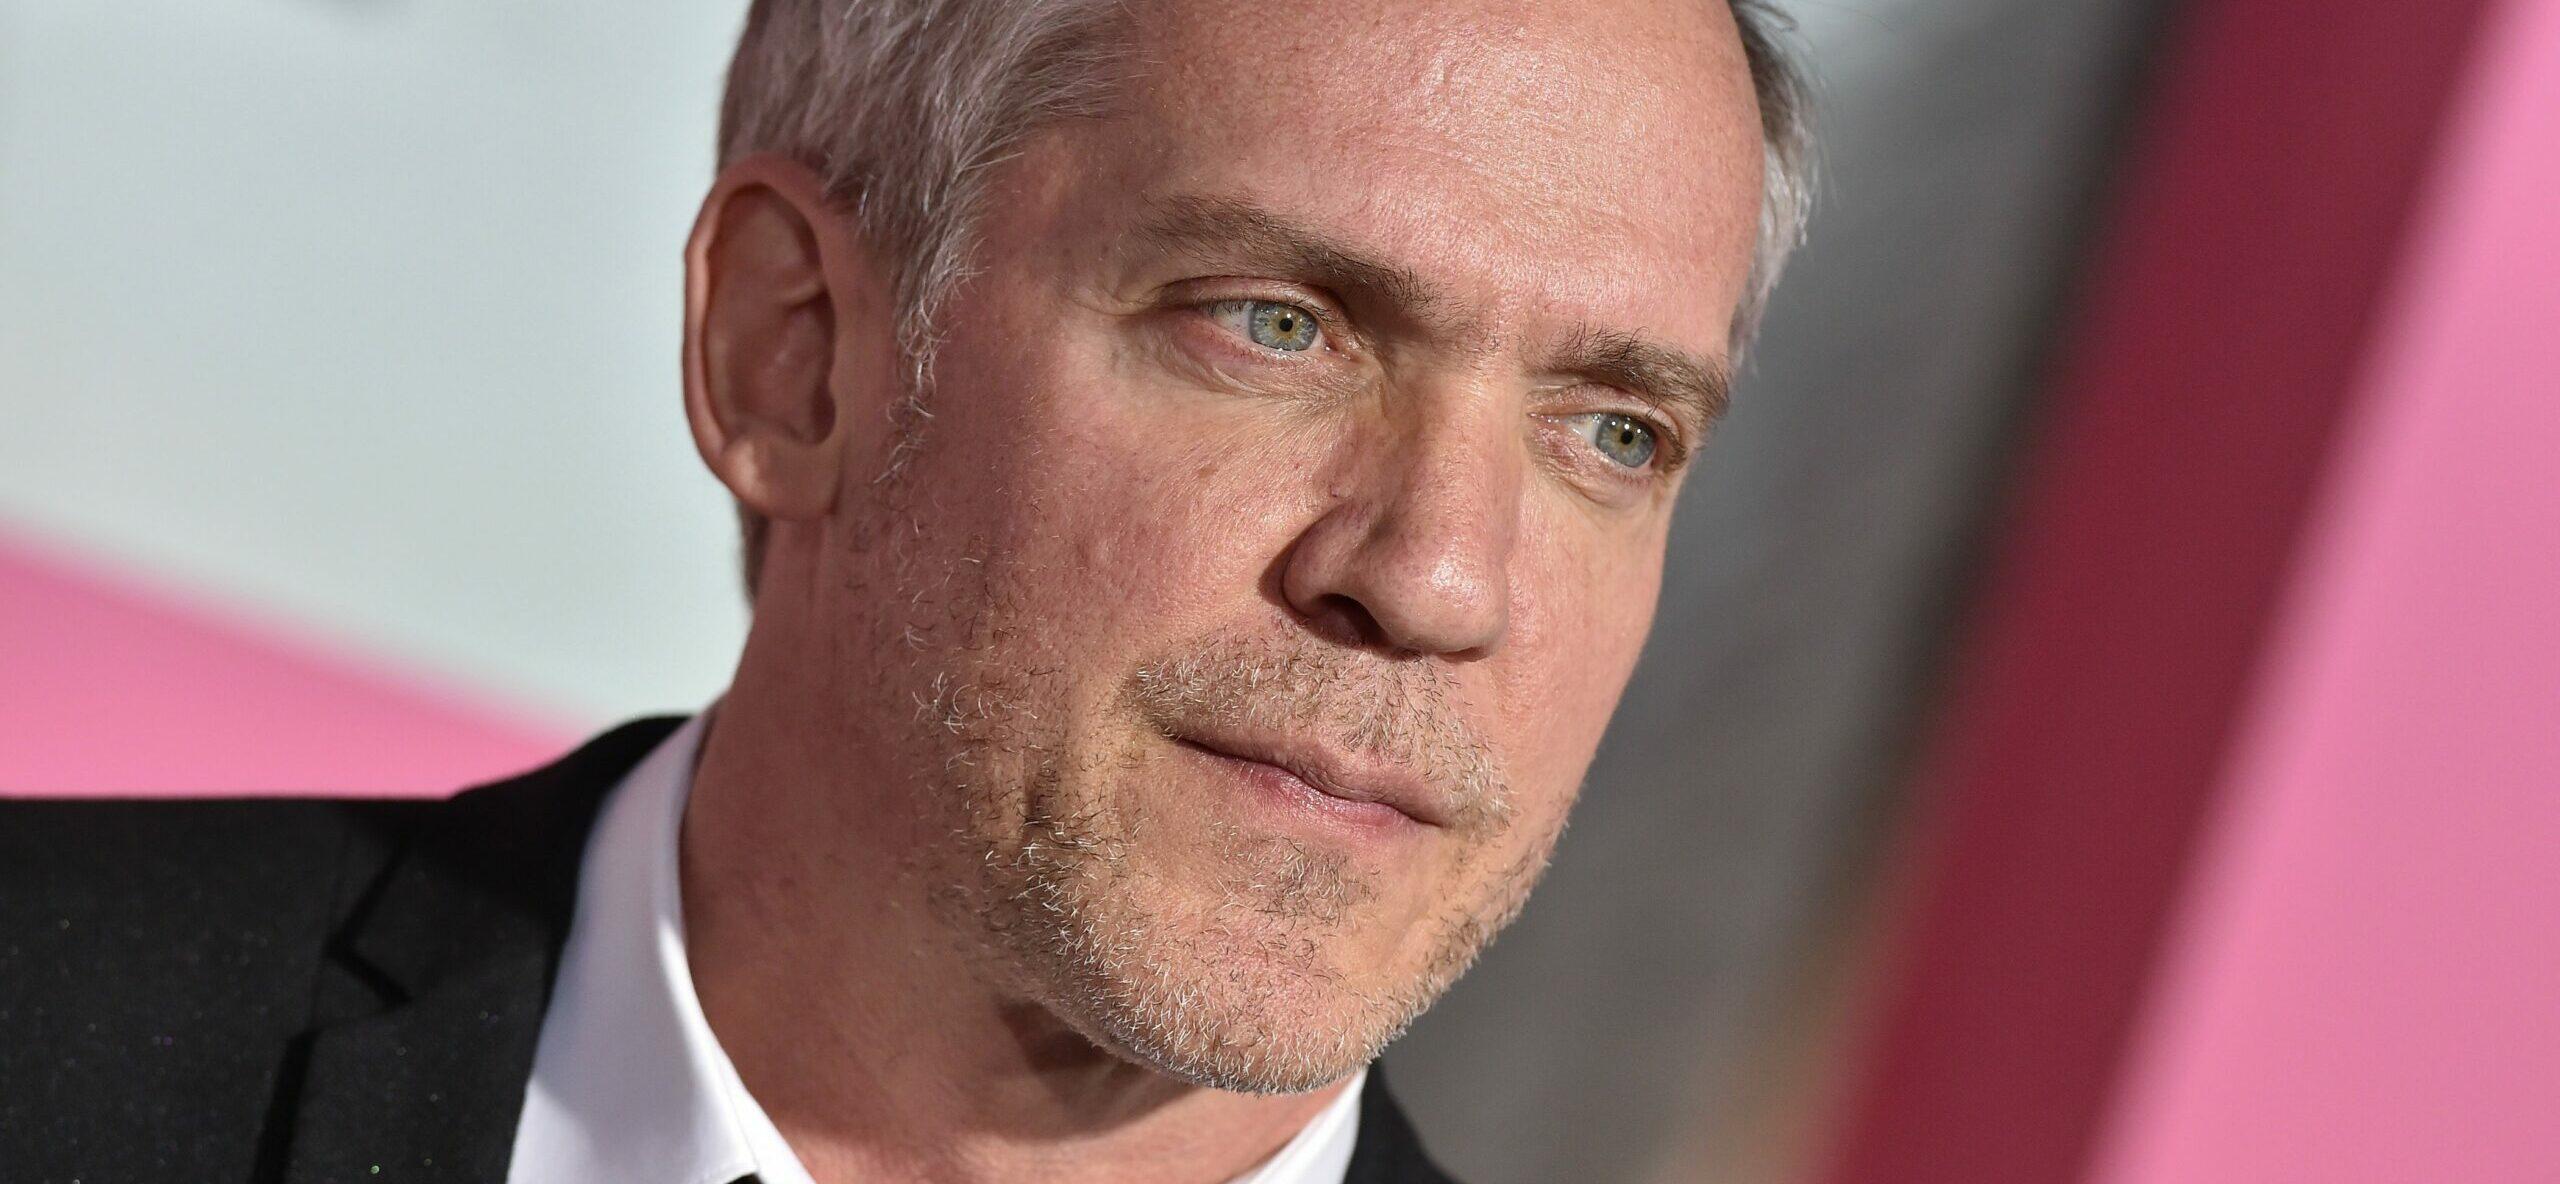 Jean-Marc Vallée: Update On Exact Cause Of Sudden Death